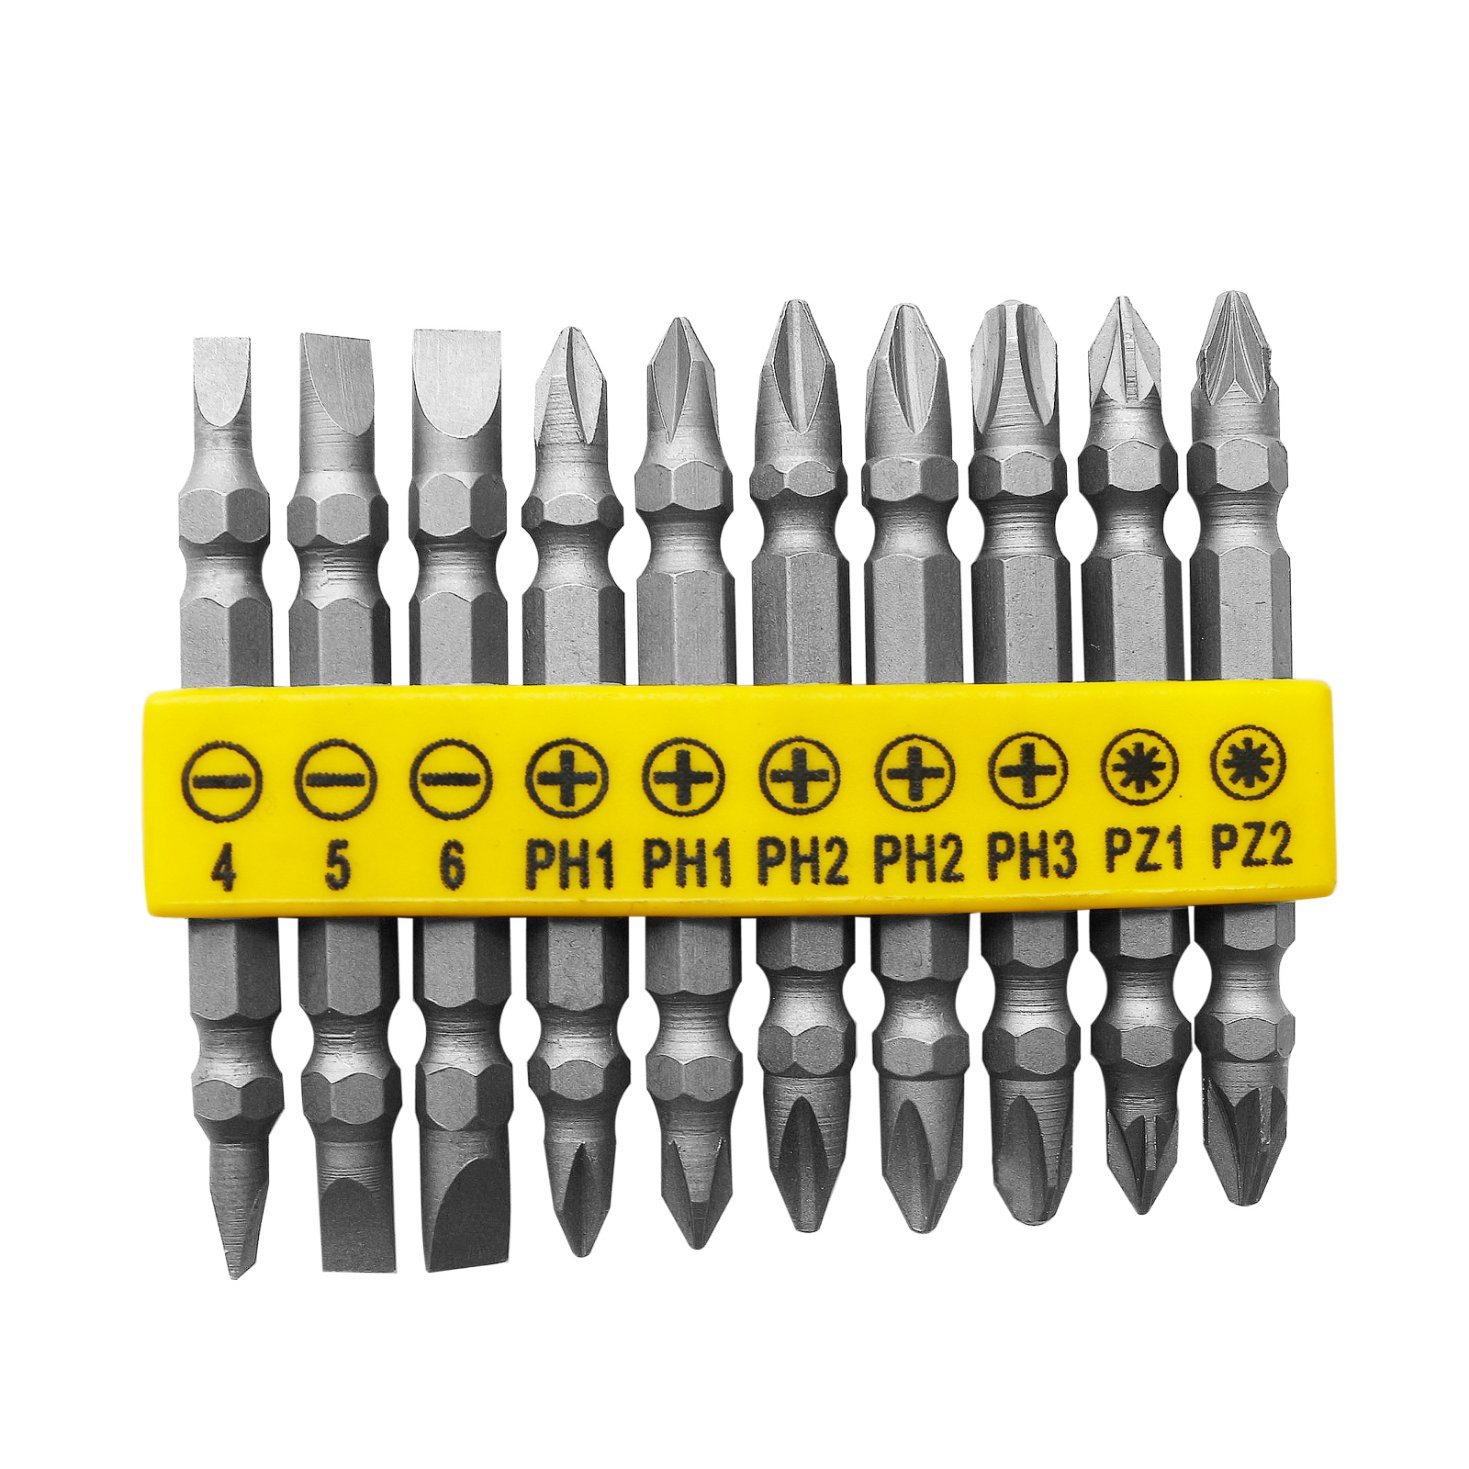 Power Tools 10PCS Double Ended Electric Screwdriver Bits Set